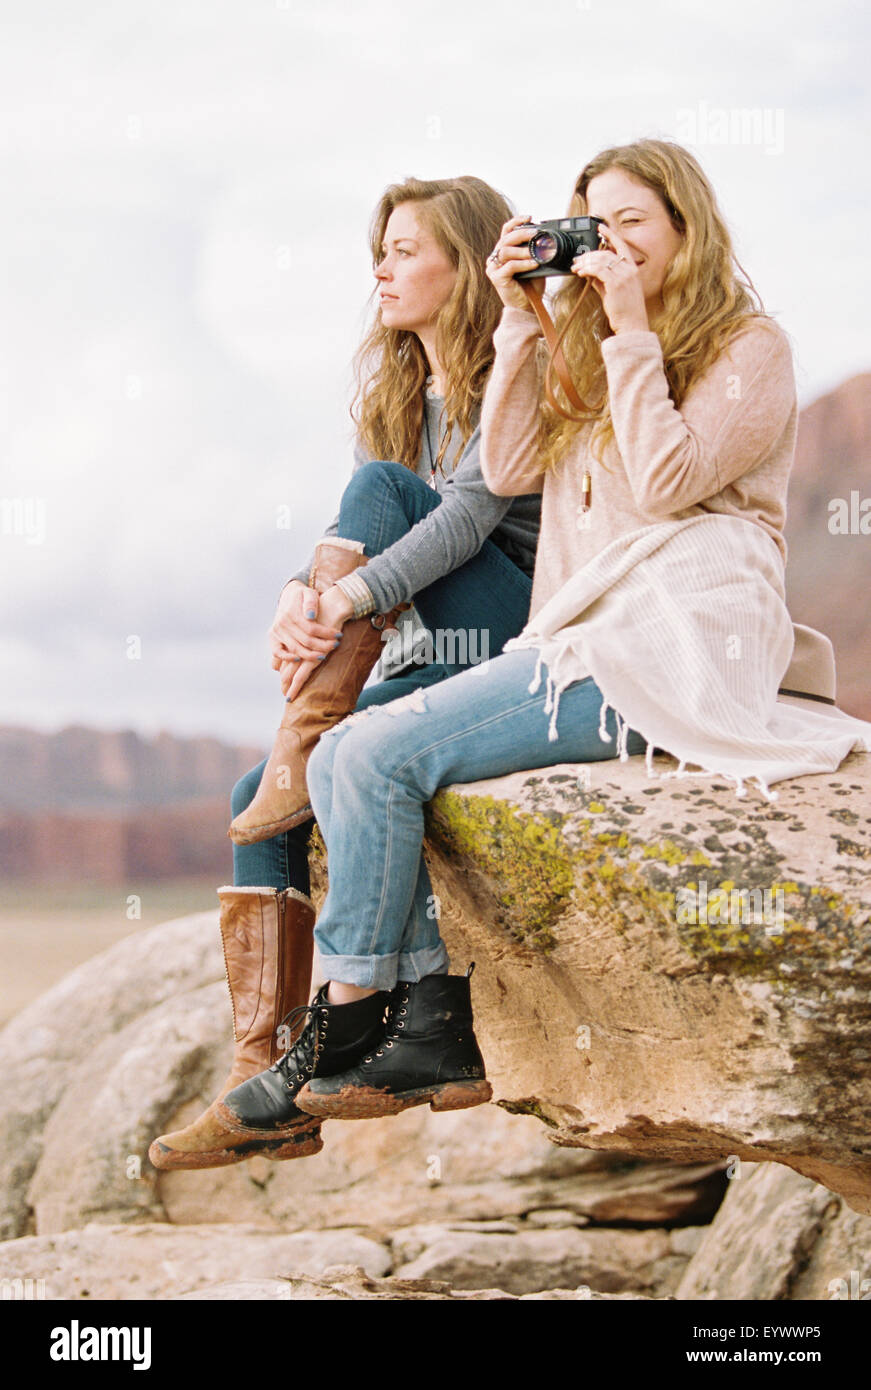 Two women sitting on rock one taking picture Stock Photo